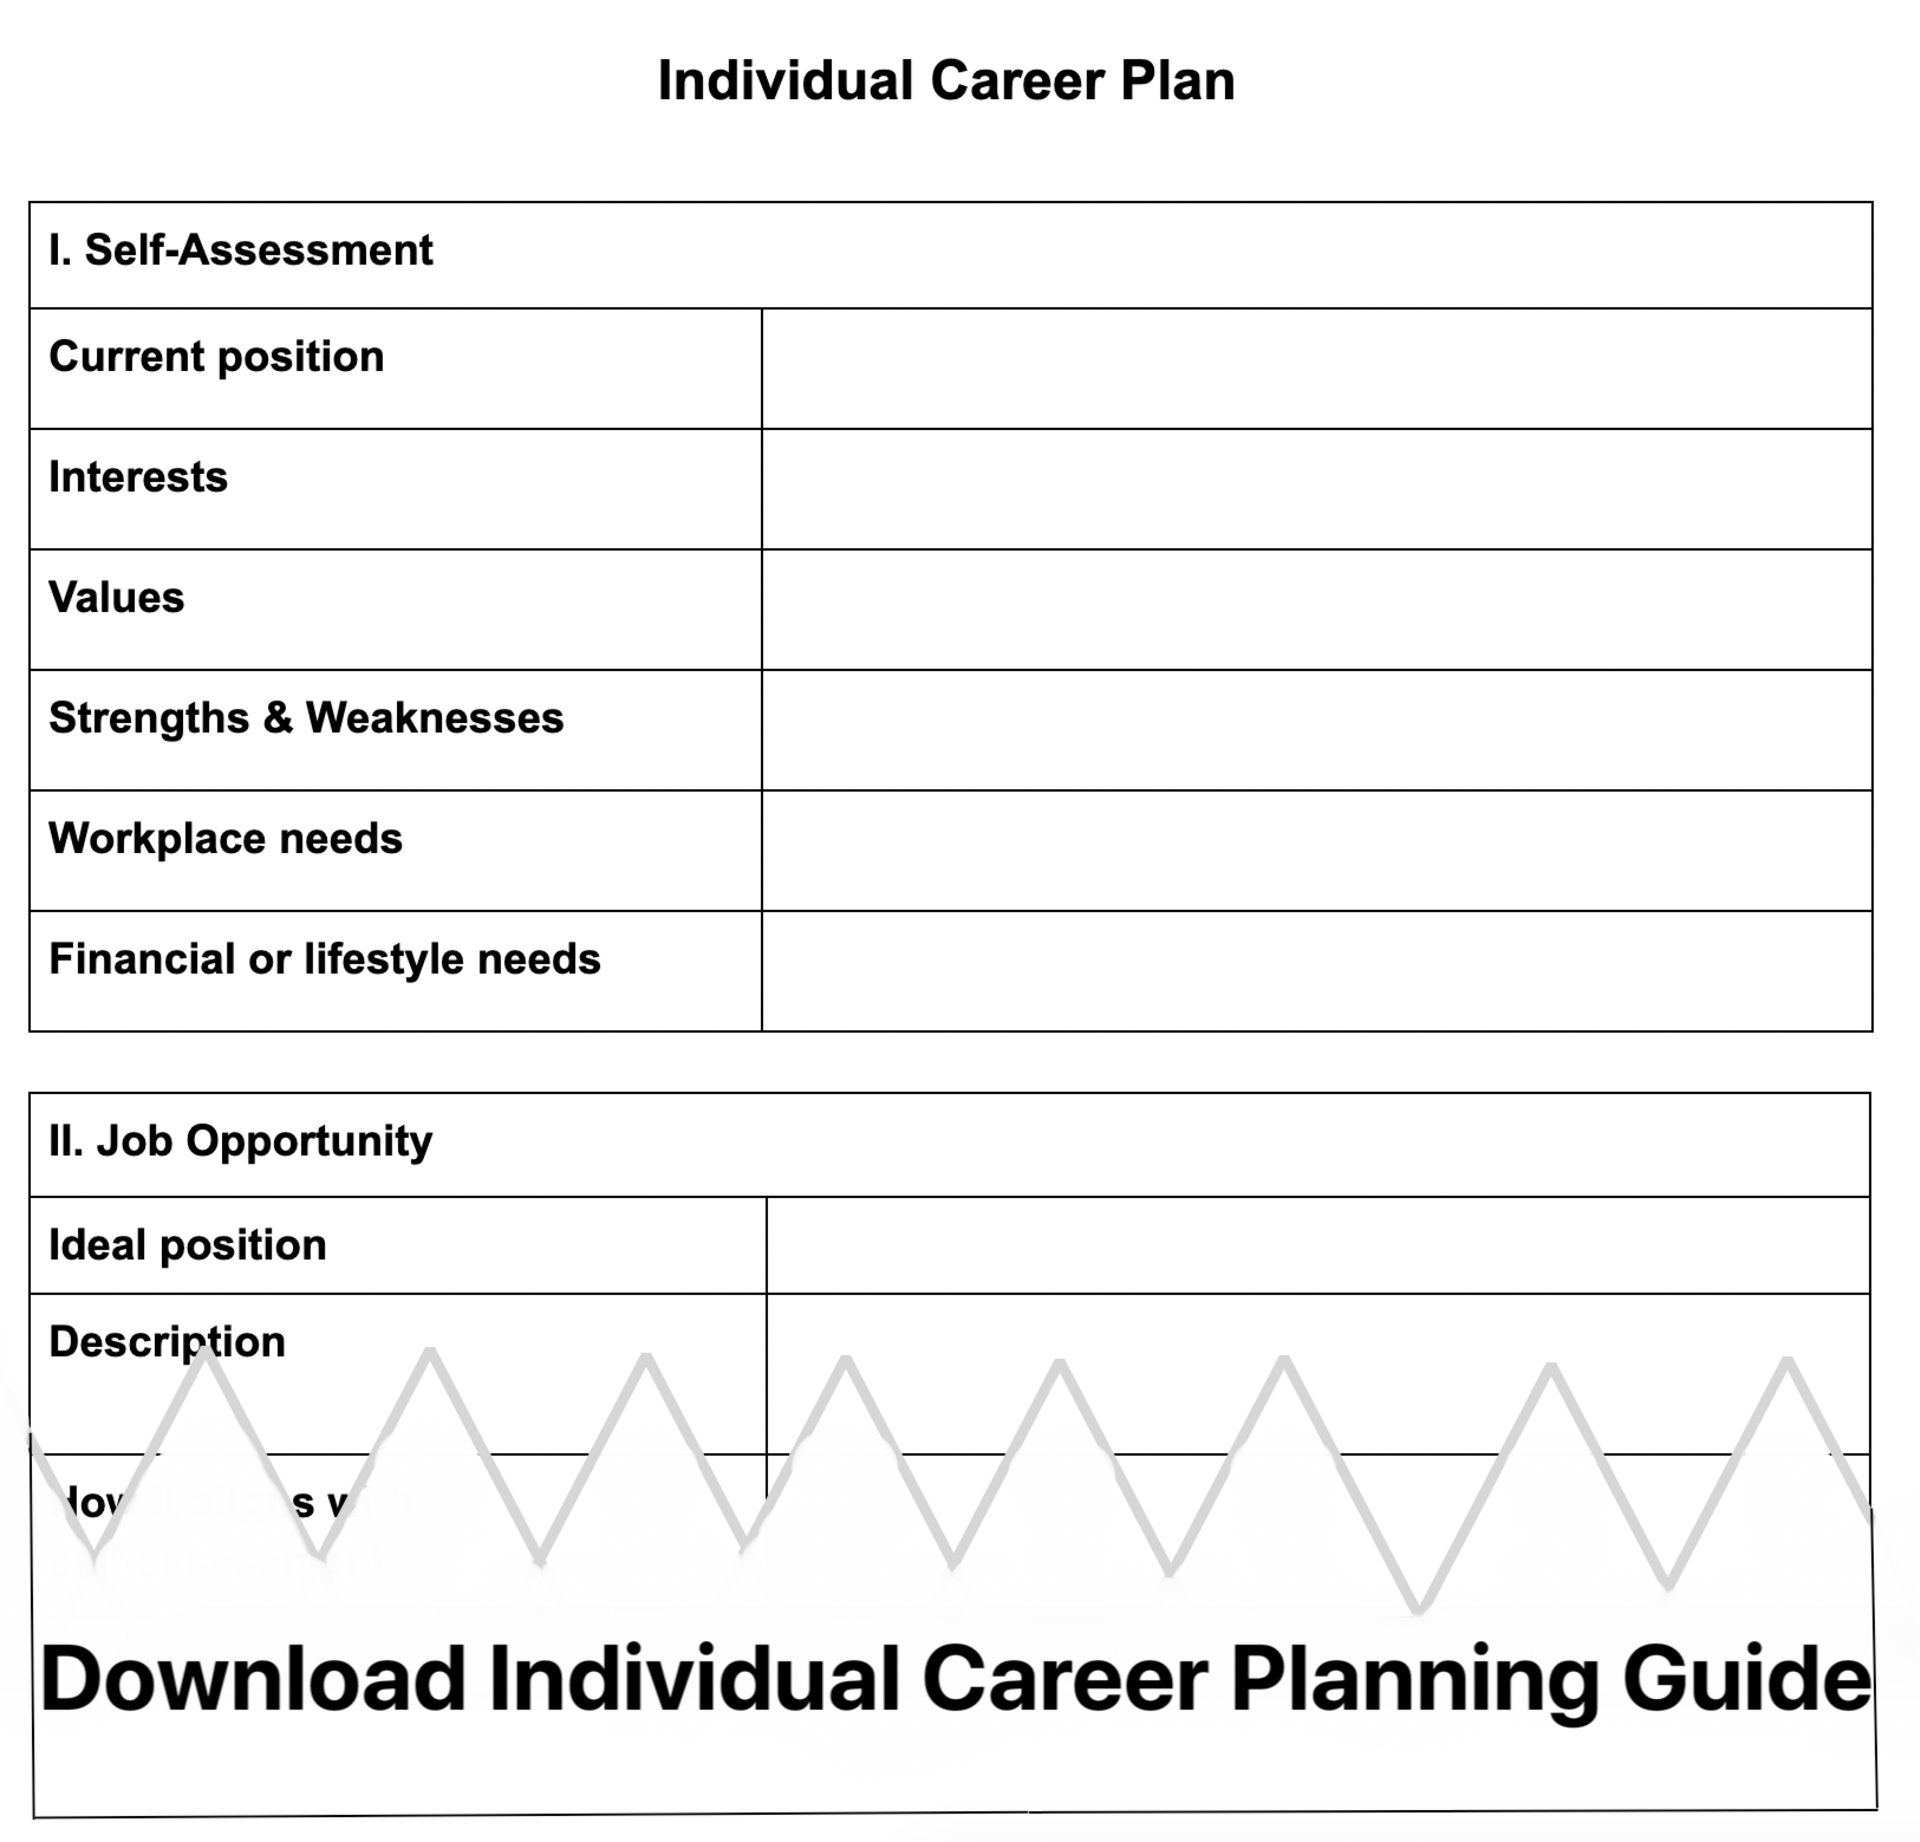 The Importance of Career Planning & Templates to Help Pingboard Blog